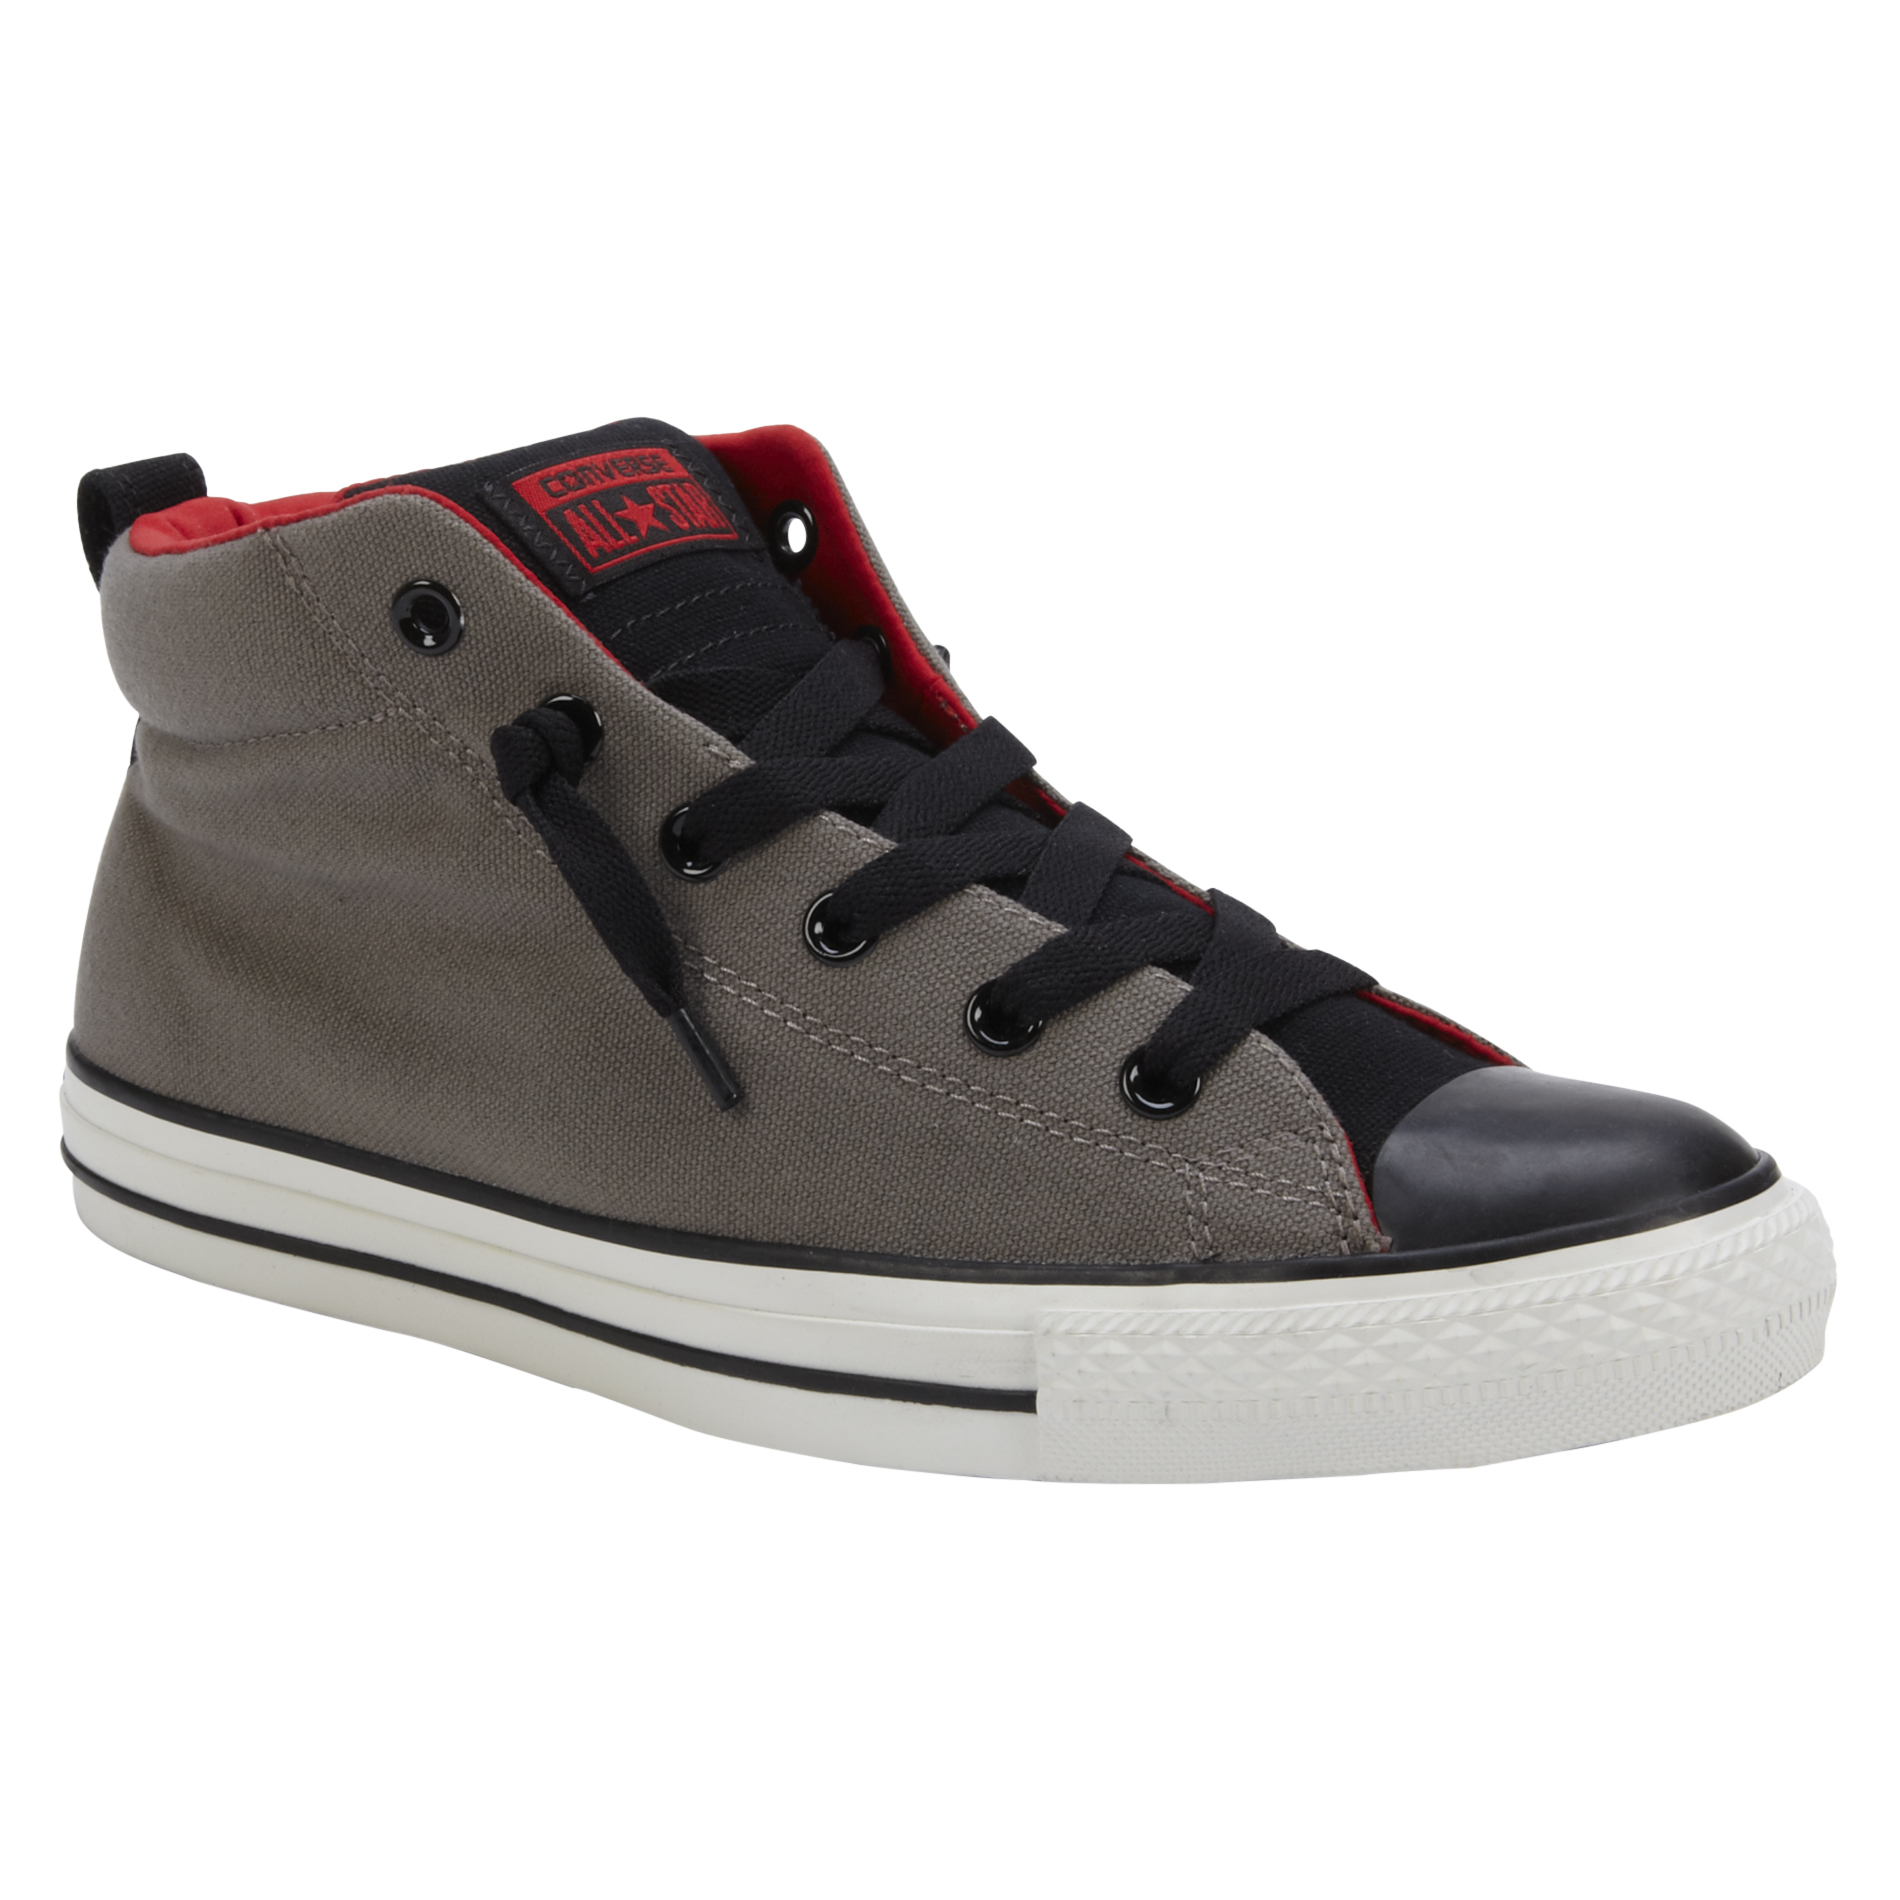 Converse Chuck Taylor All Star men's Gray/Black/Red Street Mid High Oxford Sneakers